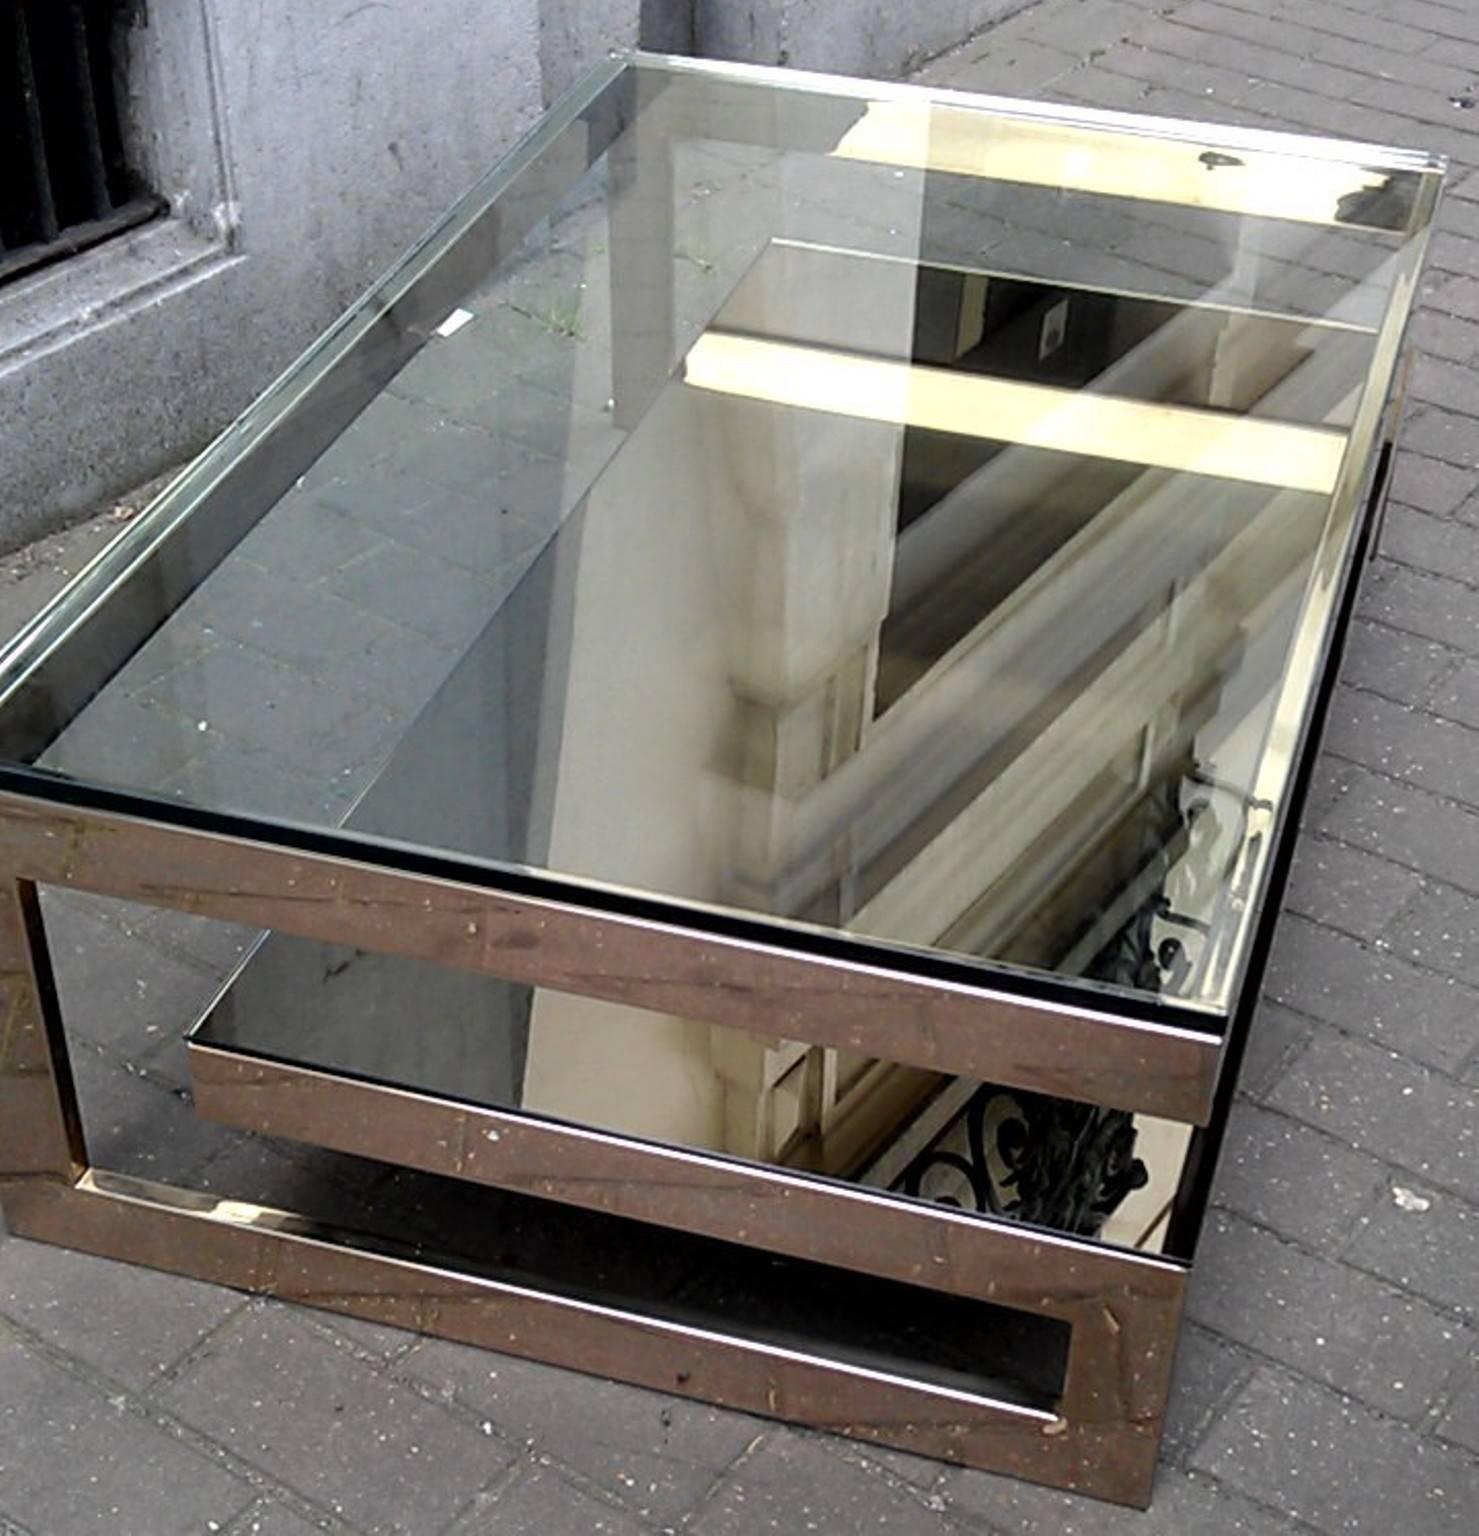 Beautiful coffee table by Belgo Chromo in 24-karat gold pate metal,
bottom shelve in smoke mirror and thick clear glass top, Belgium, 1970s.